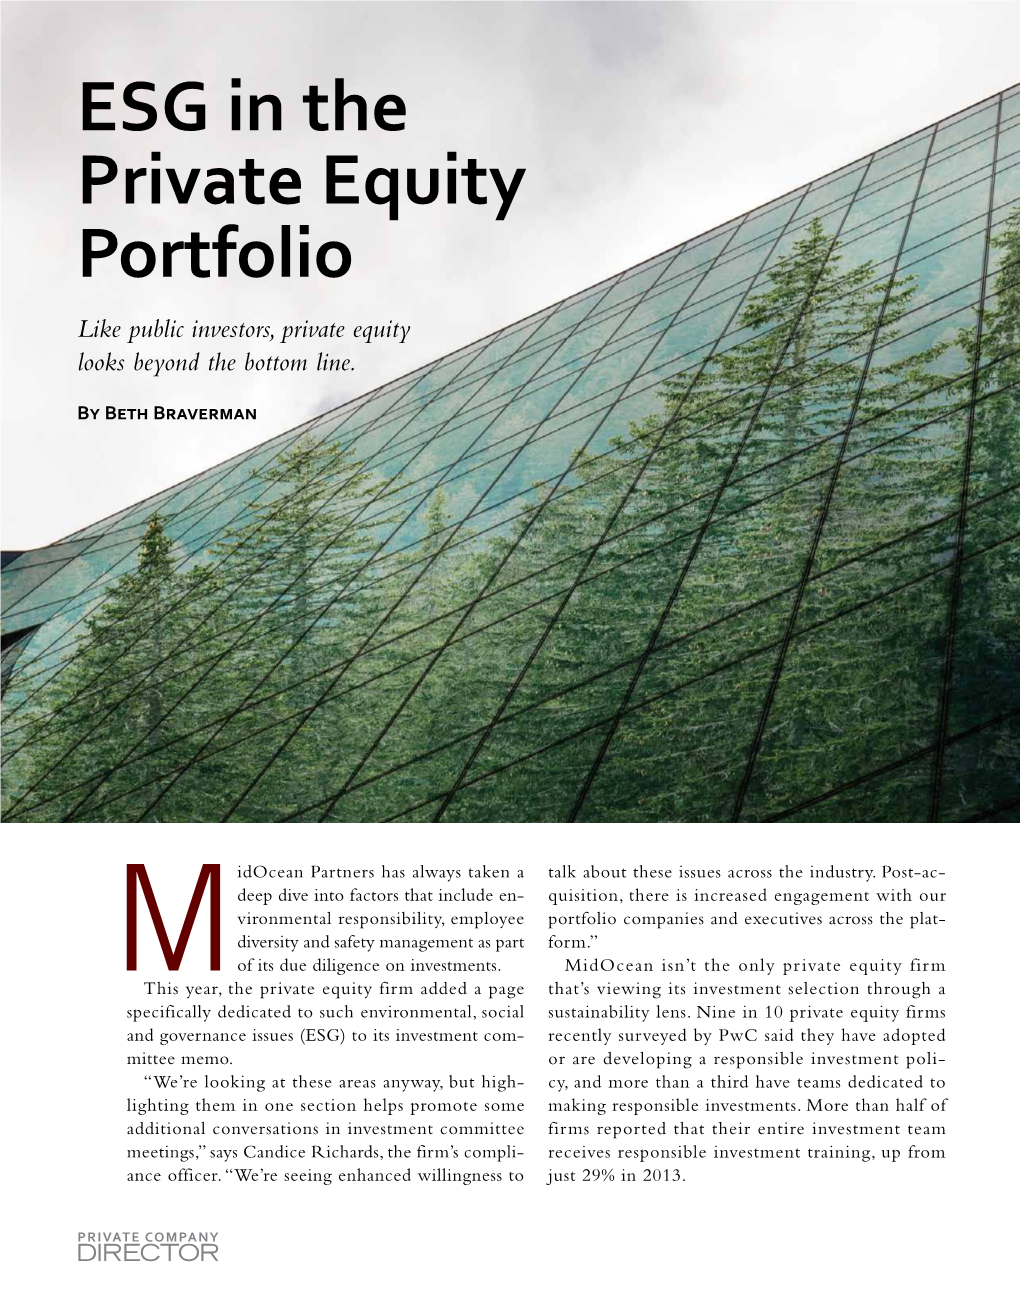 ESG in the Private Equity Portfolio Like Public Investors, Private Equity Looks Beyond the Bottom Line